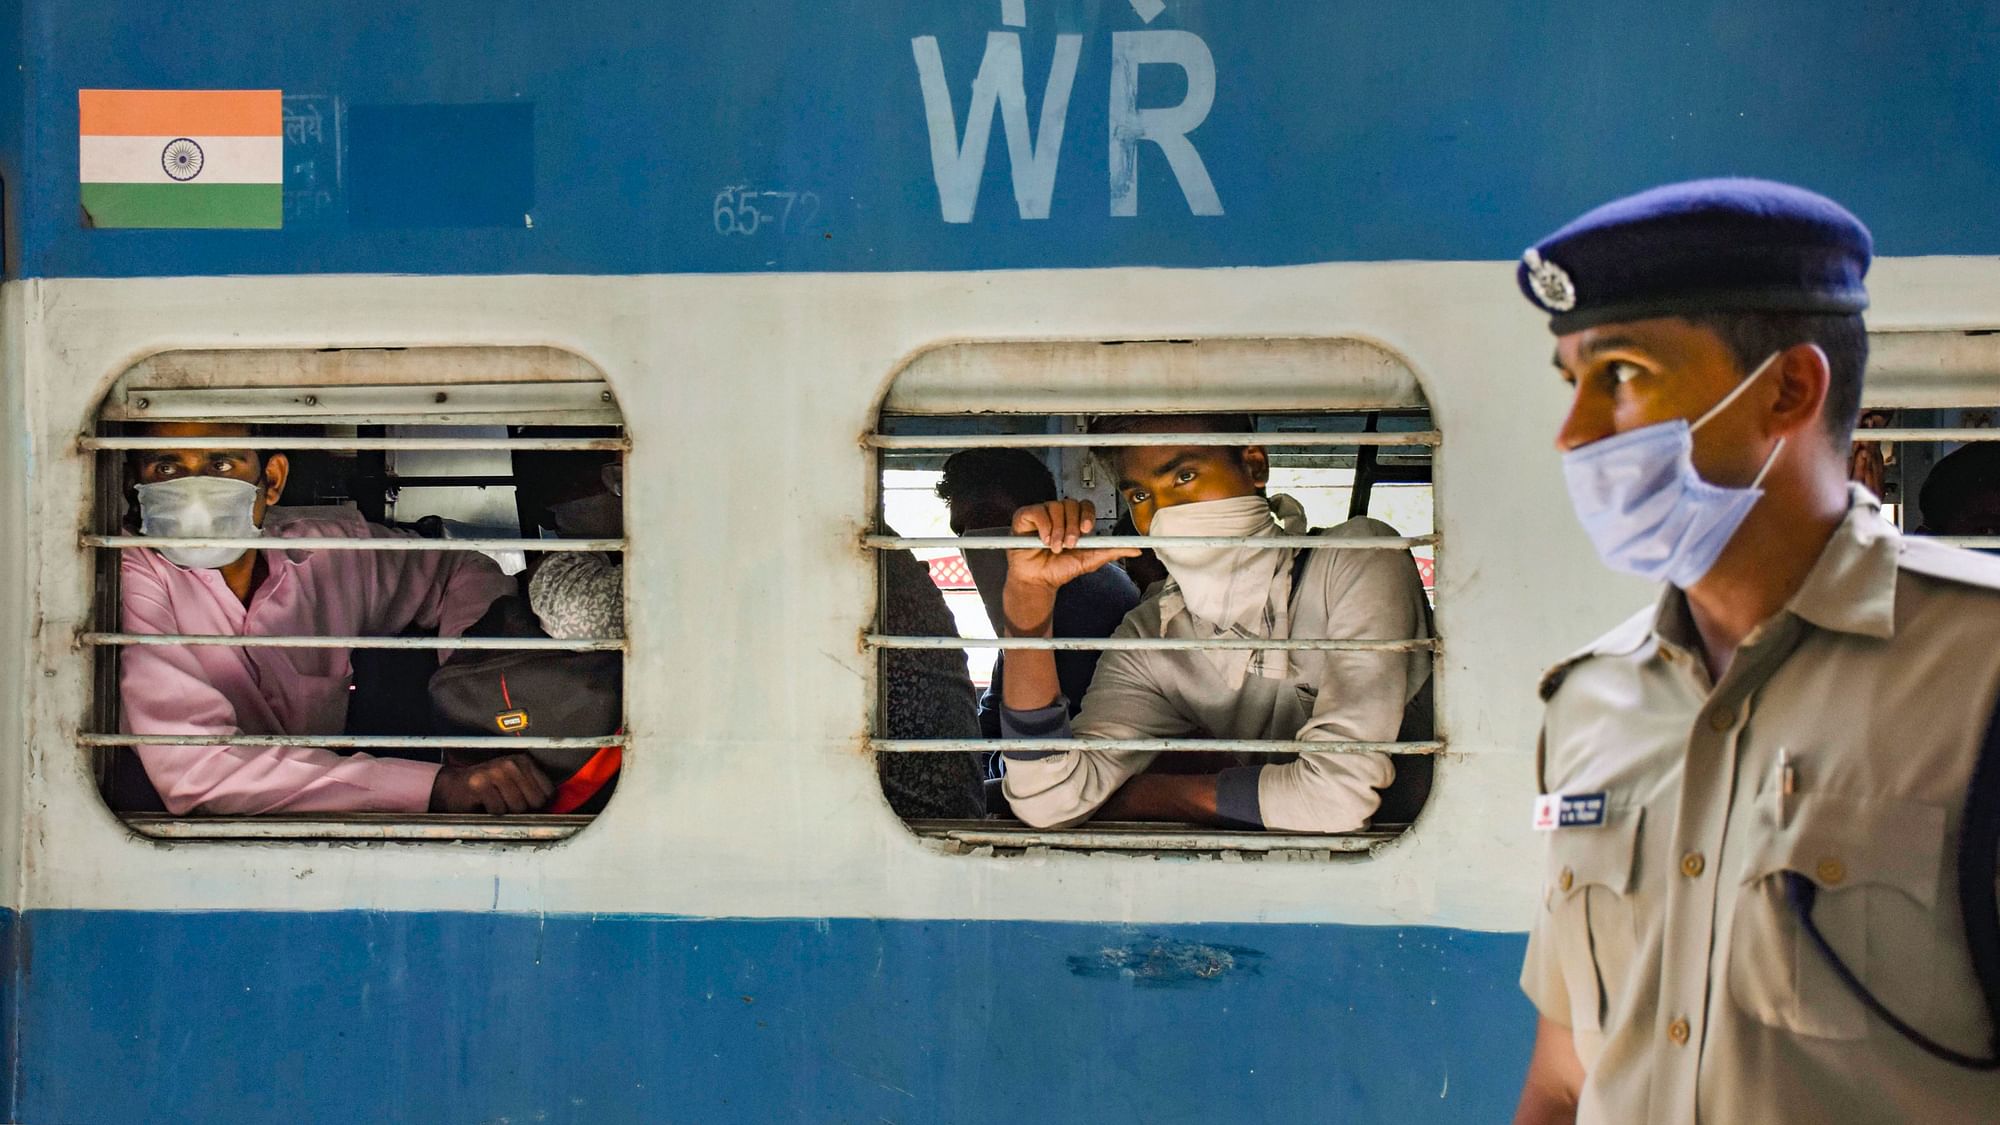 Indian Railways has decided to operate 80 more trains from 12 September, for which reservations will start from 10 September. (Image used for representation only)